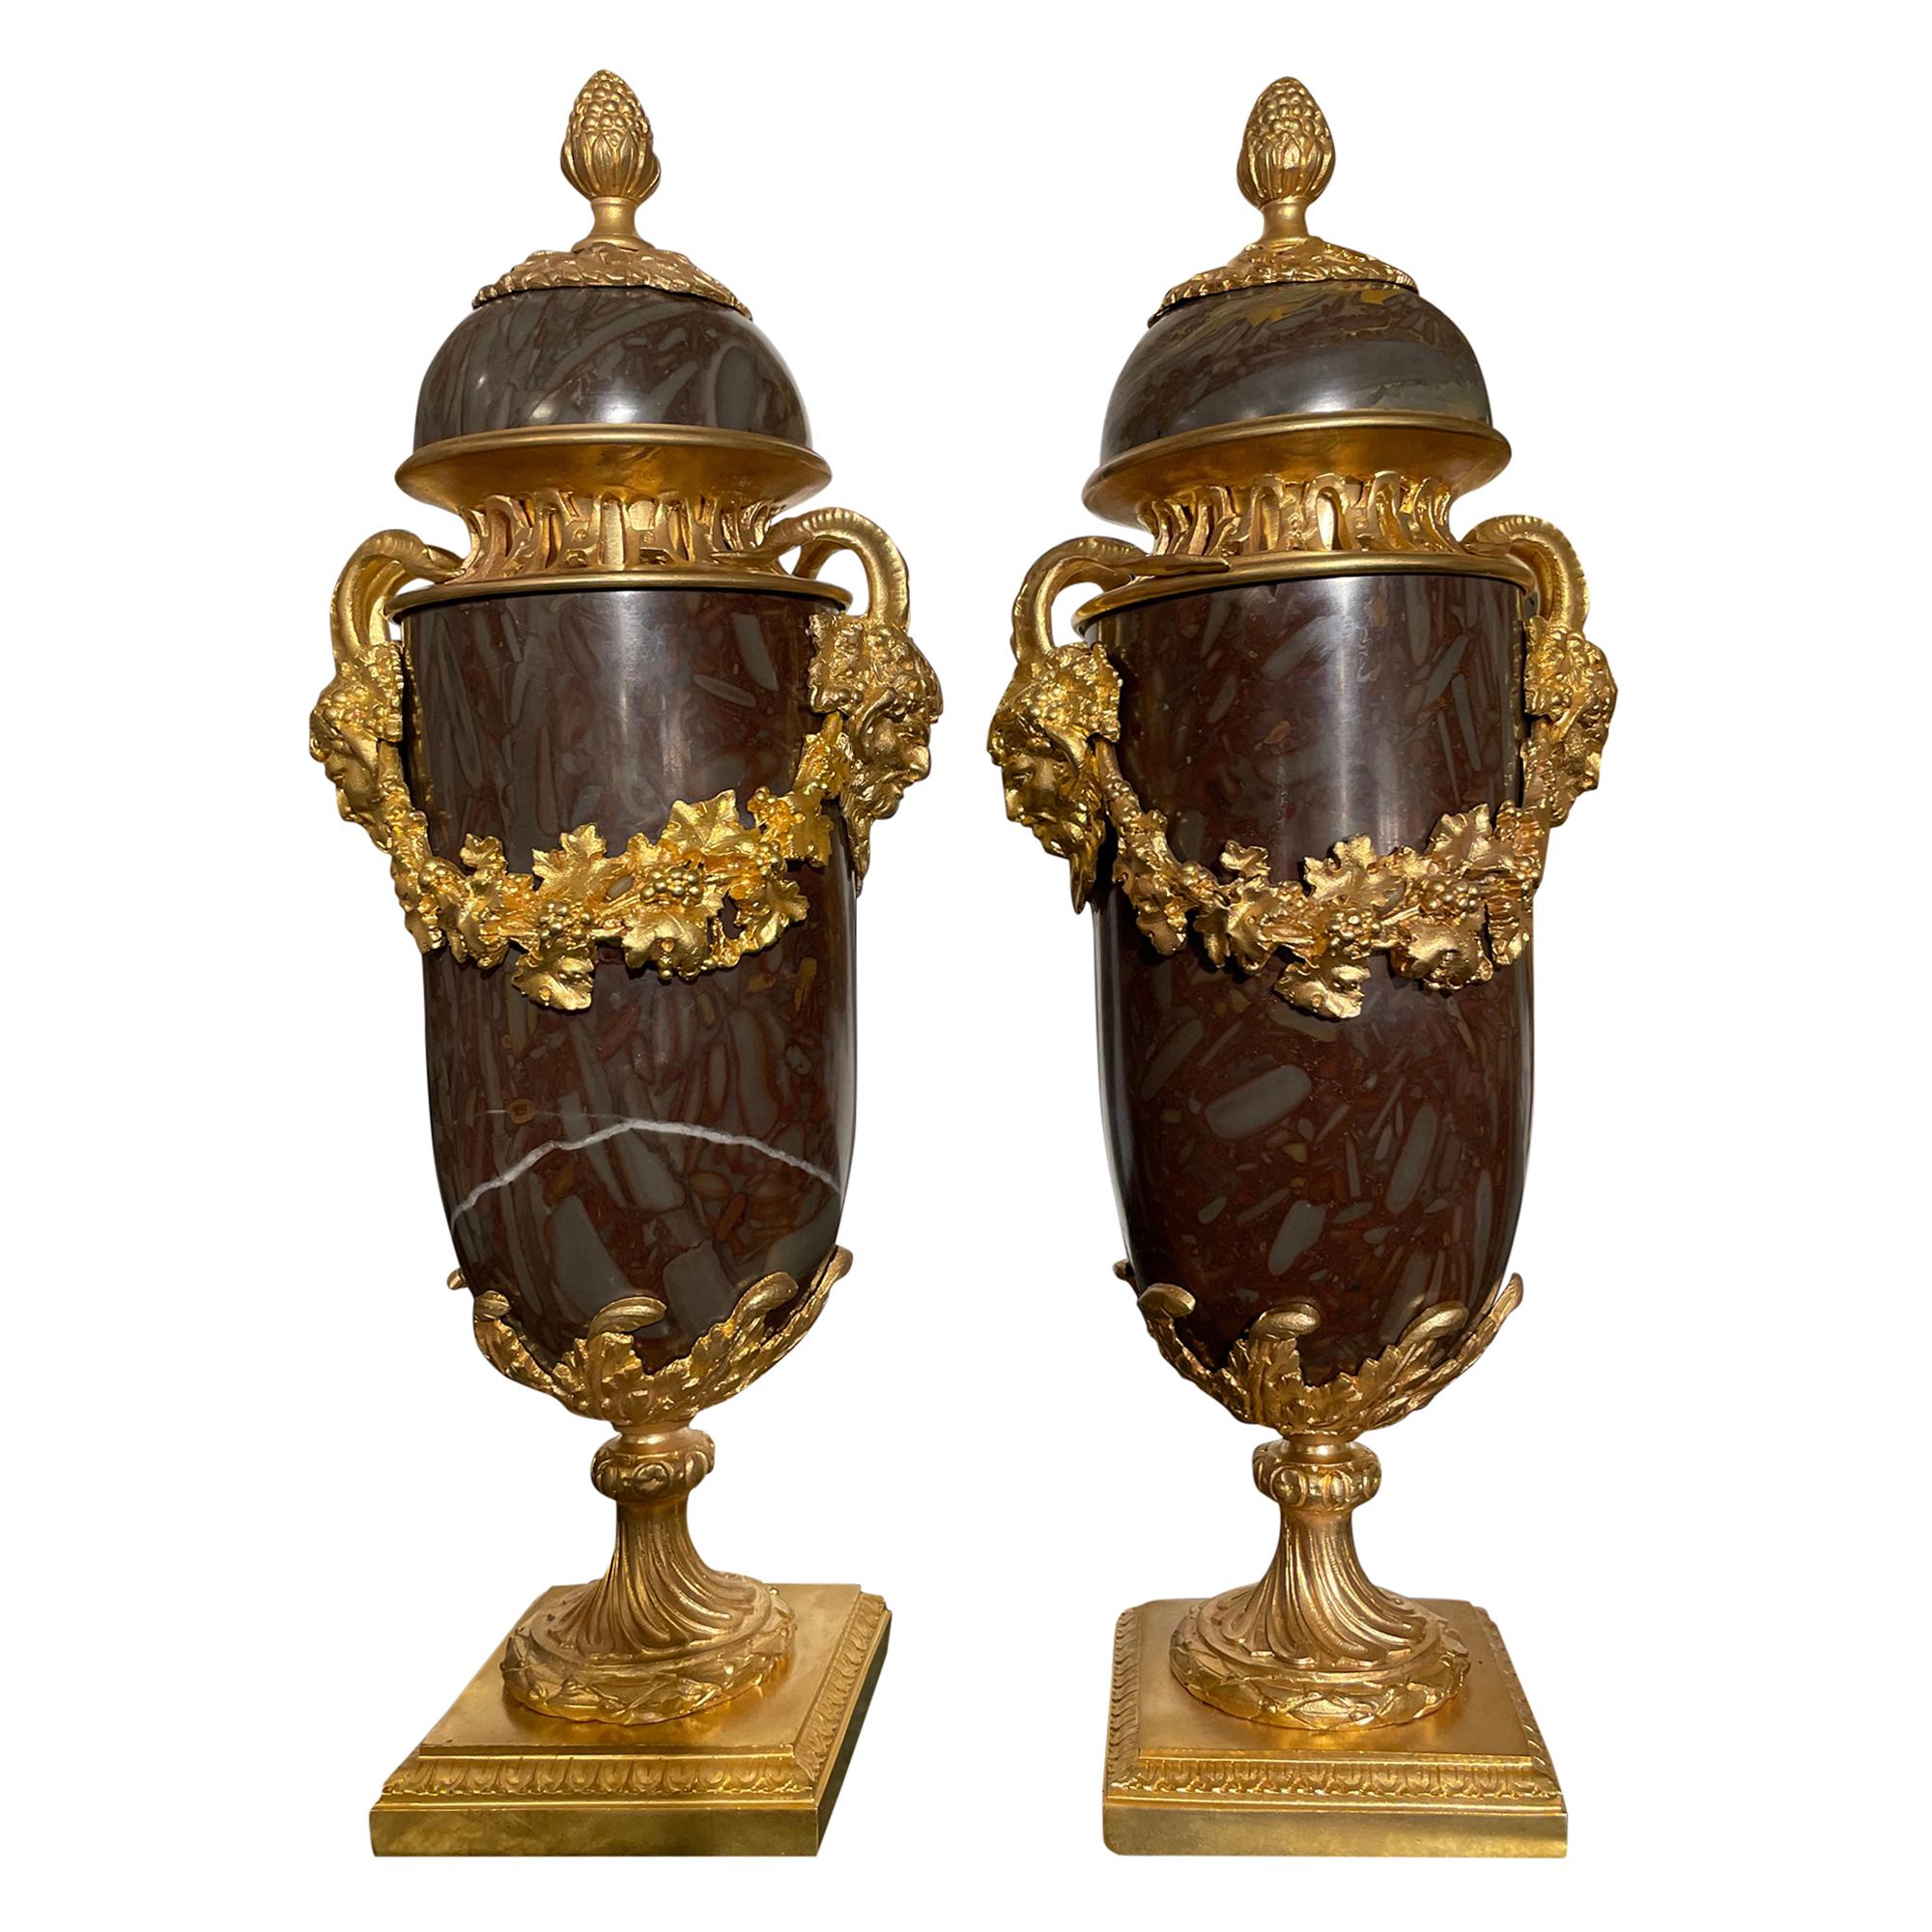 Pair of French 20th Century Louis XVI Style Onyx and Ormolu Lidded Urns For Sale